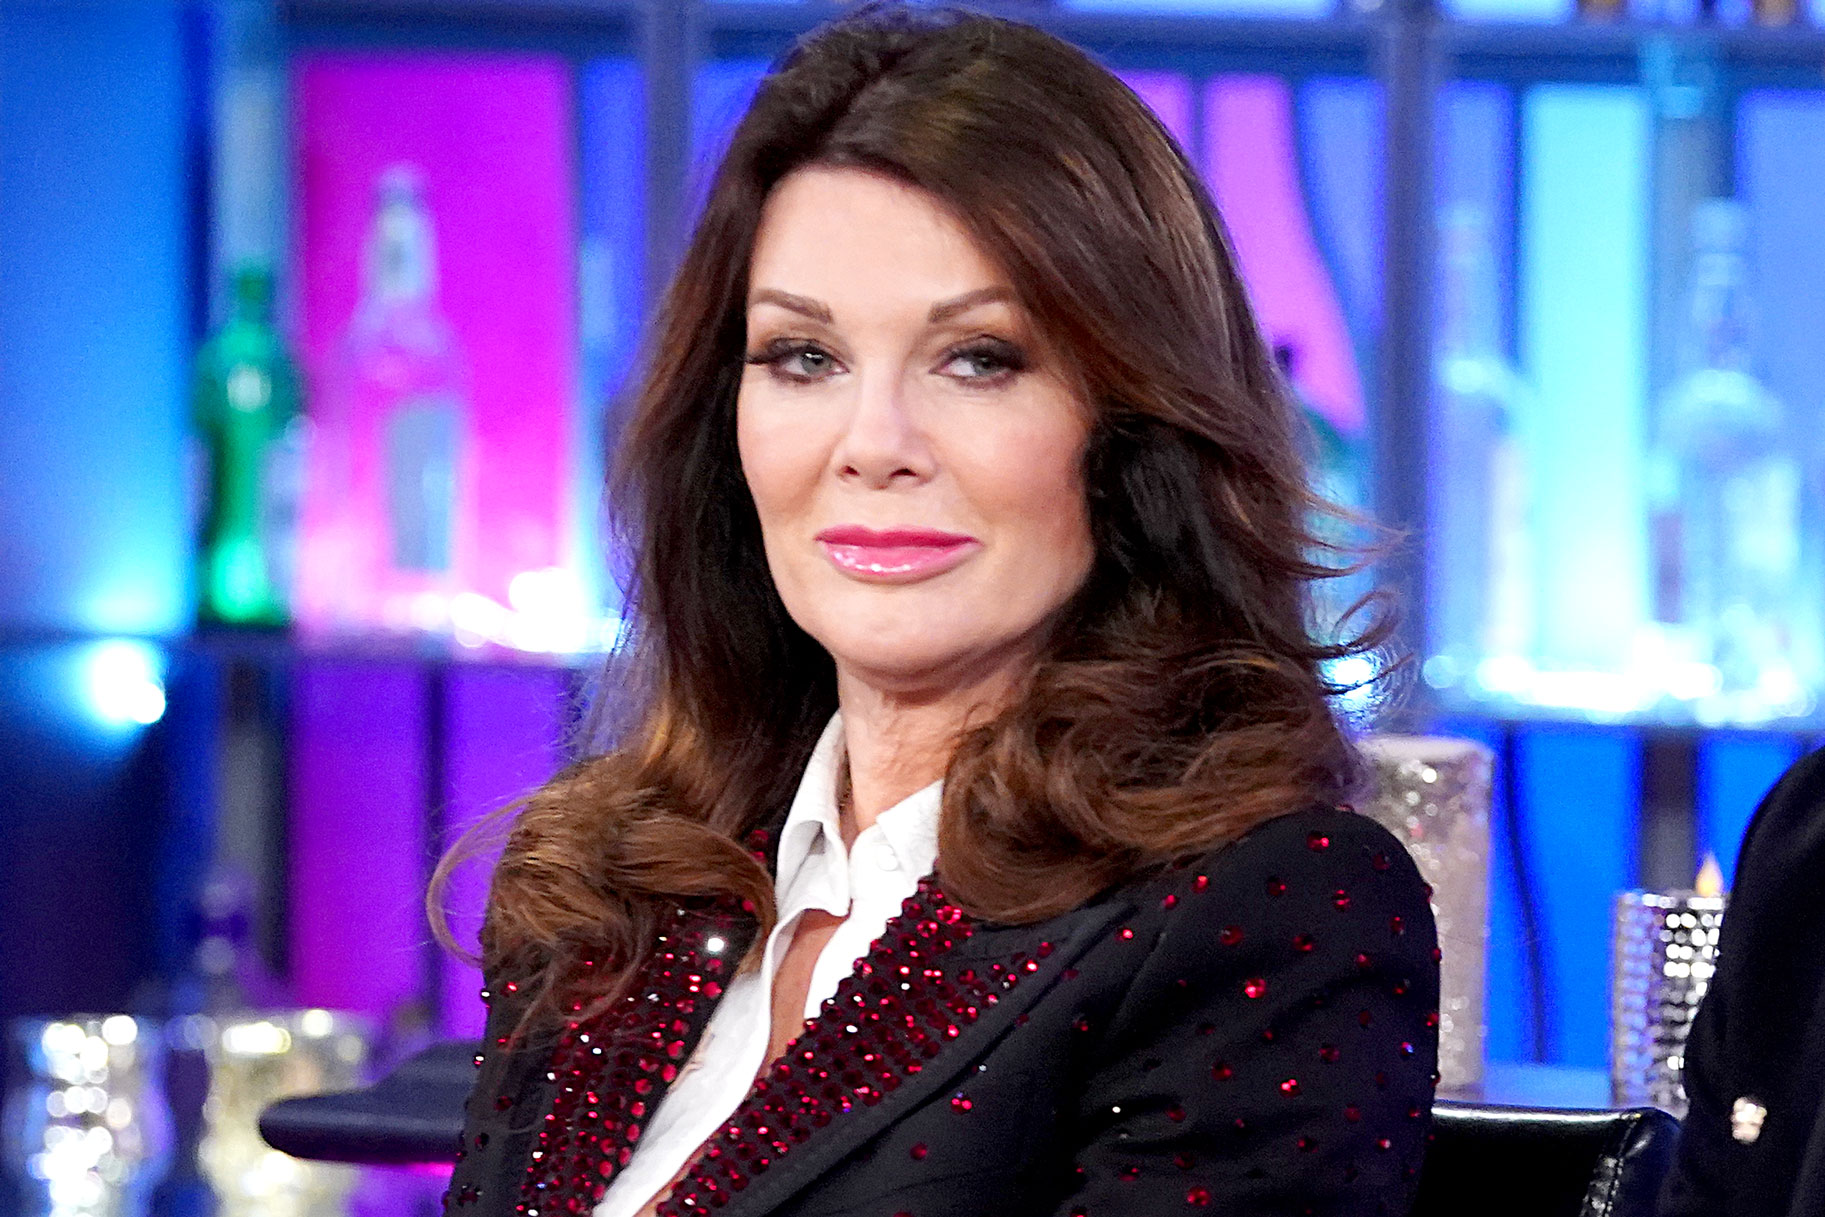 Lisa Vanderpump jets out of town day after explosive RHOBH reunion